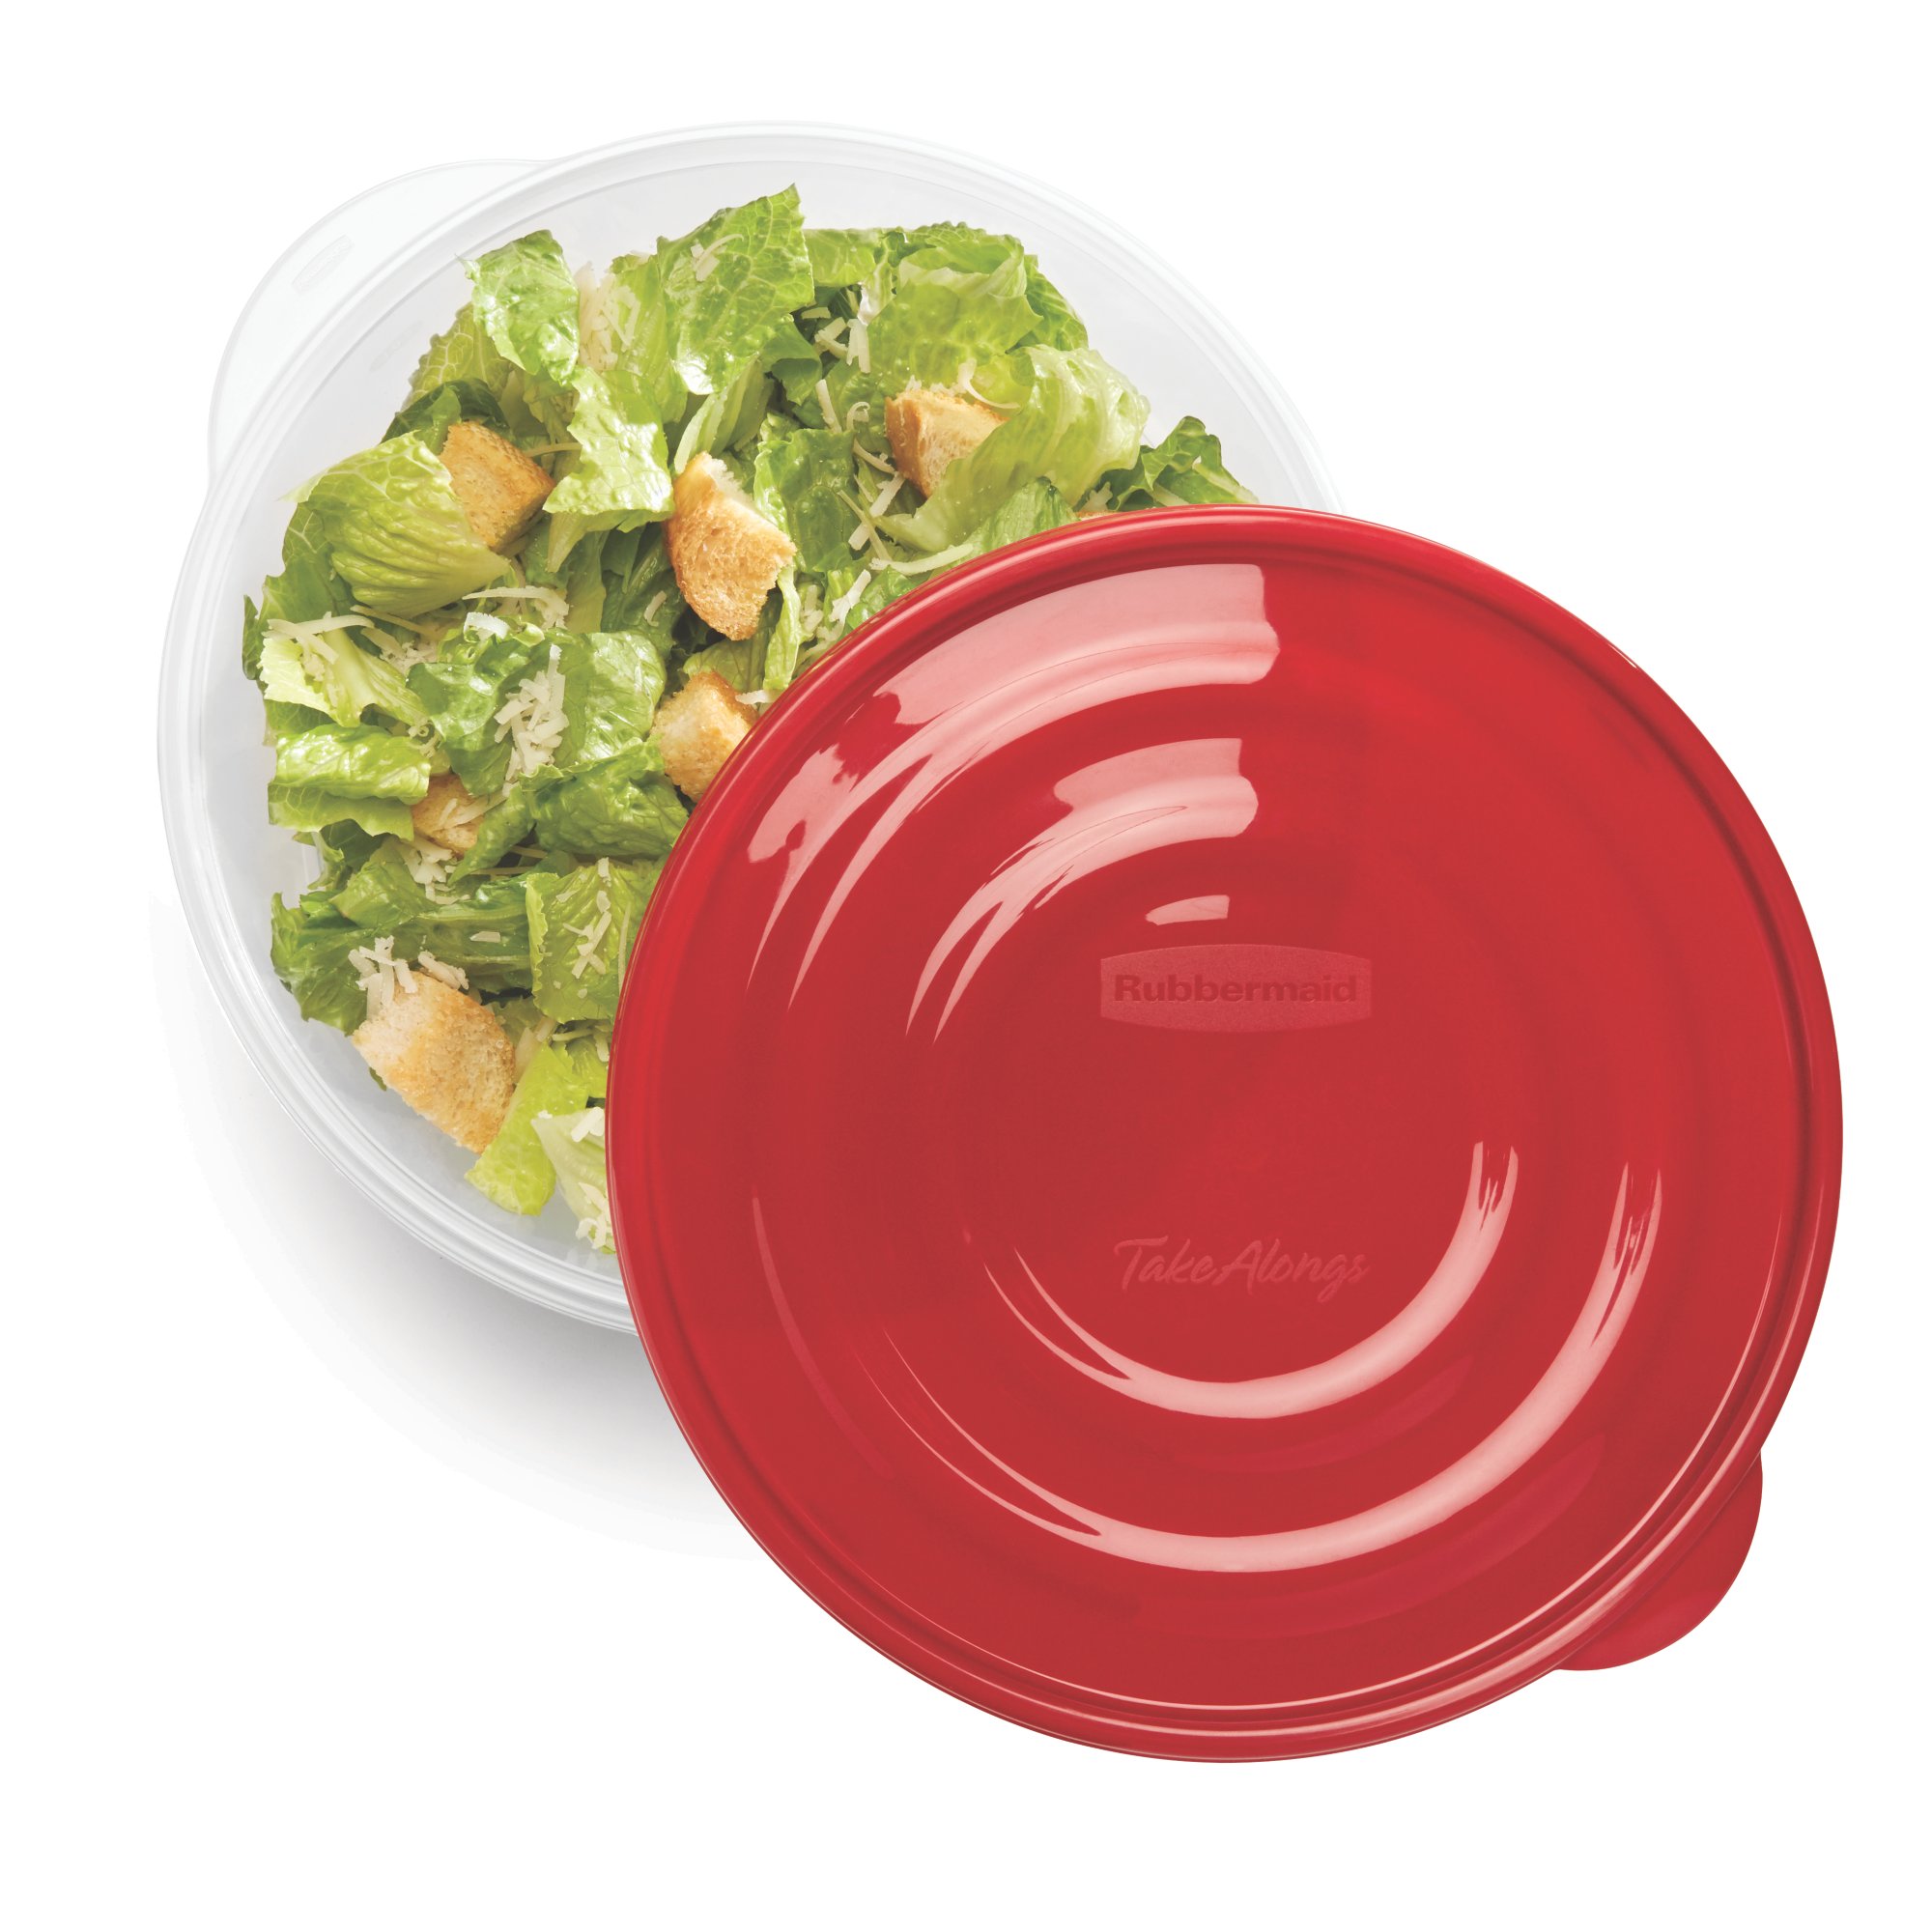 https://s7d9.scene7.com/is/image/NewellRubbermaid/SAP-rubbermaid-food-storage-takealongs-serving-bowl-container-with-lid-15.7cup-2pc-overhead-1?wid=2000&hei=2000